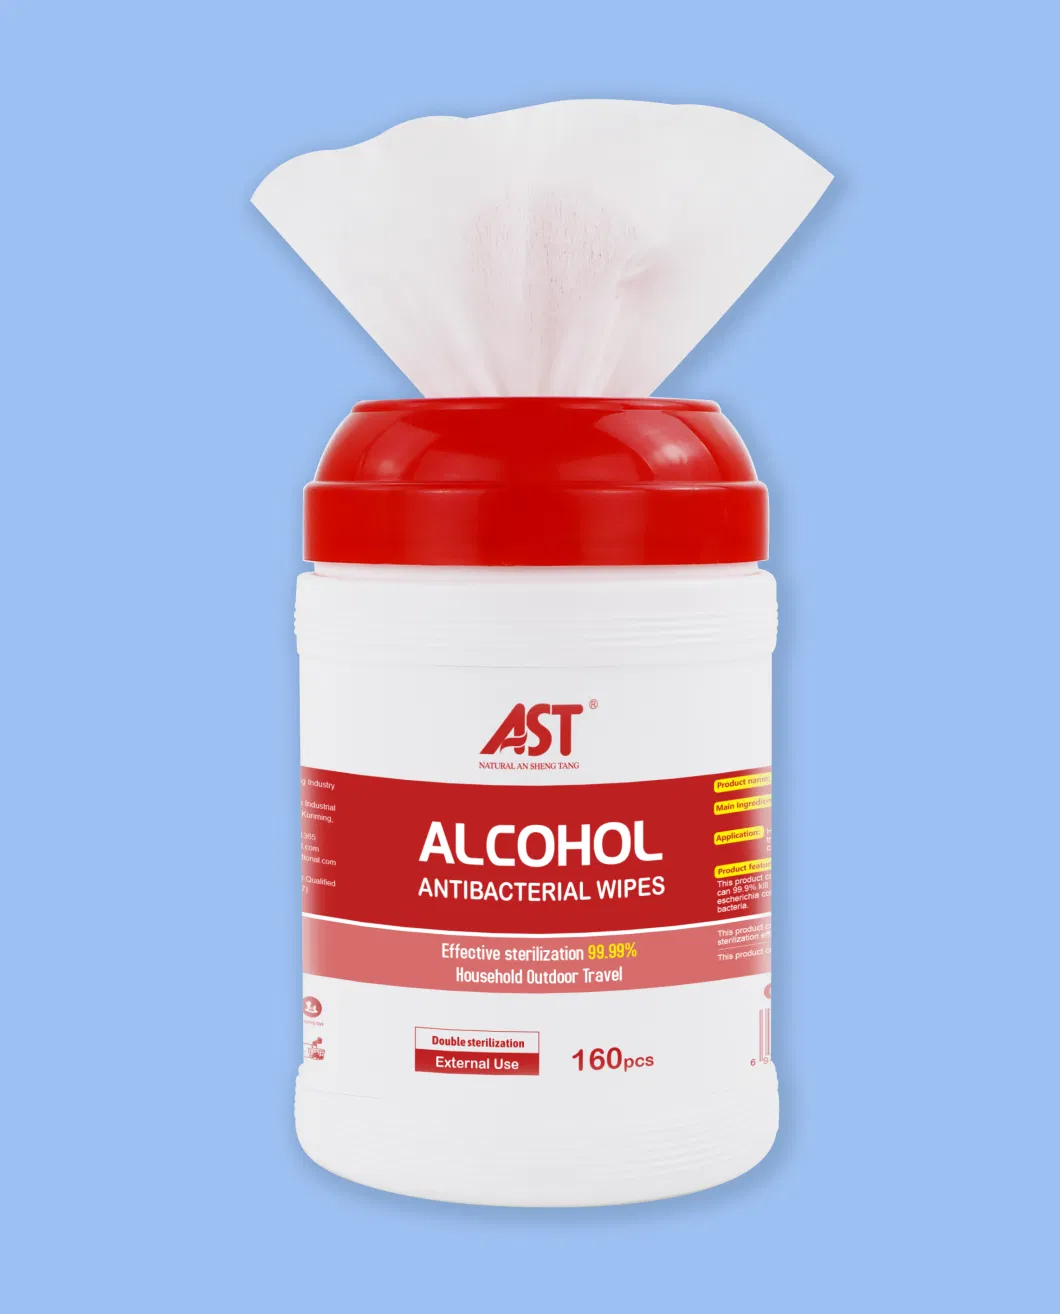 75% Alcohol Medical Cleaning Disinfection and Sterilization Wet Wipes